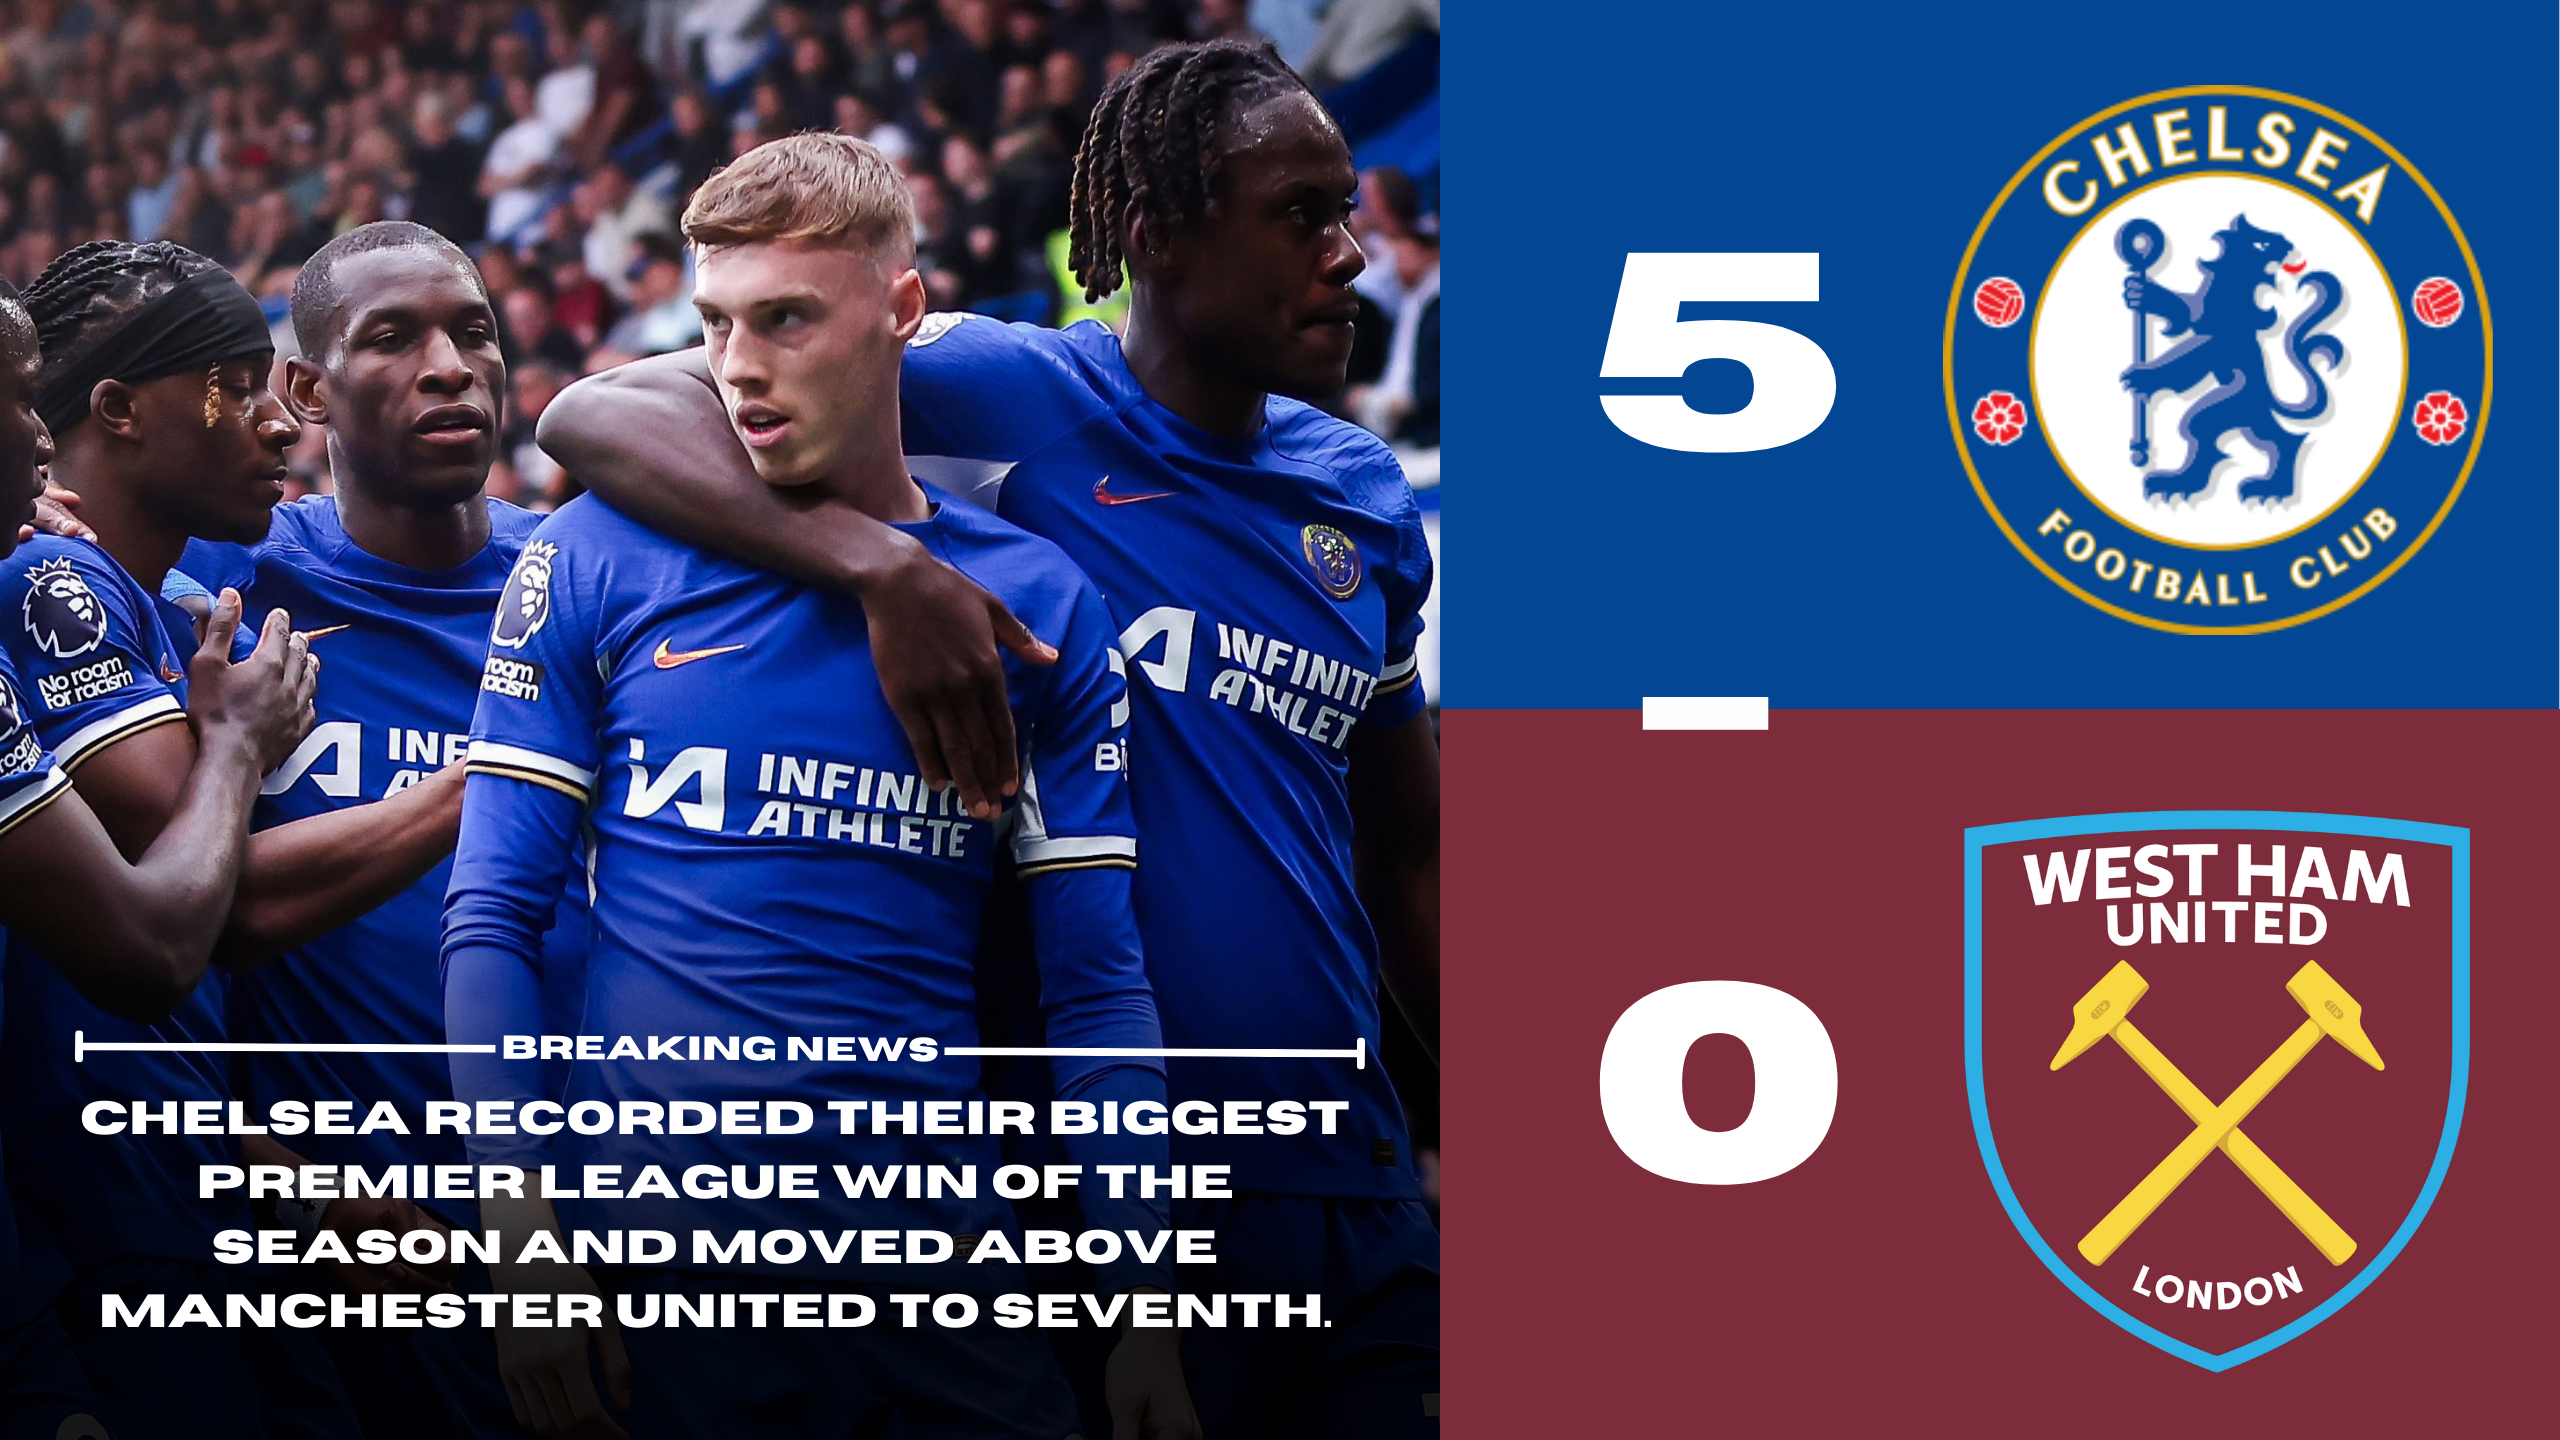 Chelsea 5 - 0 West Ham. Chelsea recorded their biggest Premier League win of the season and moved above Manchester United to seventh.